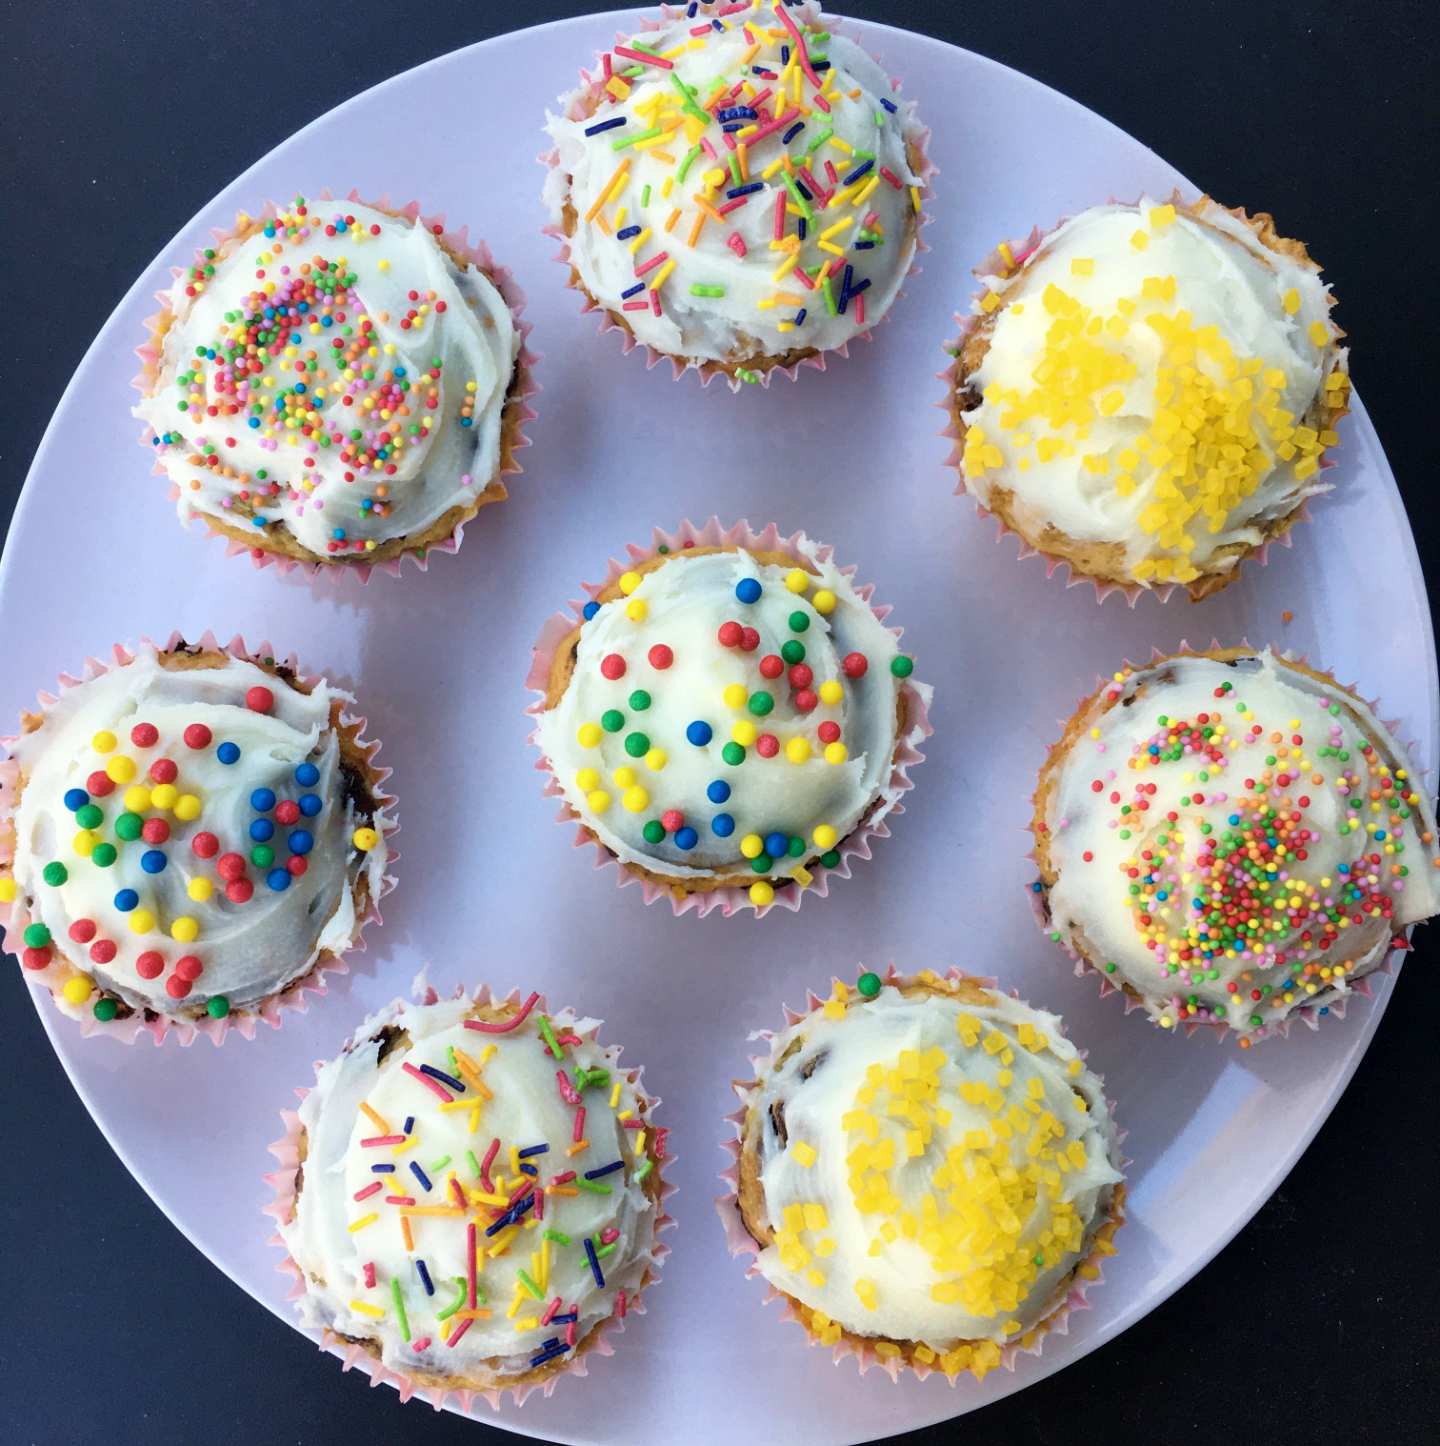 8 vanilla cupcakes with white icing and rainbow sprinkles, sitting on a white plate